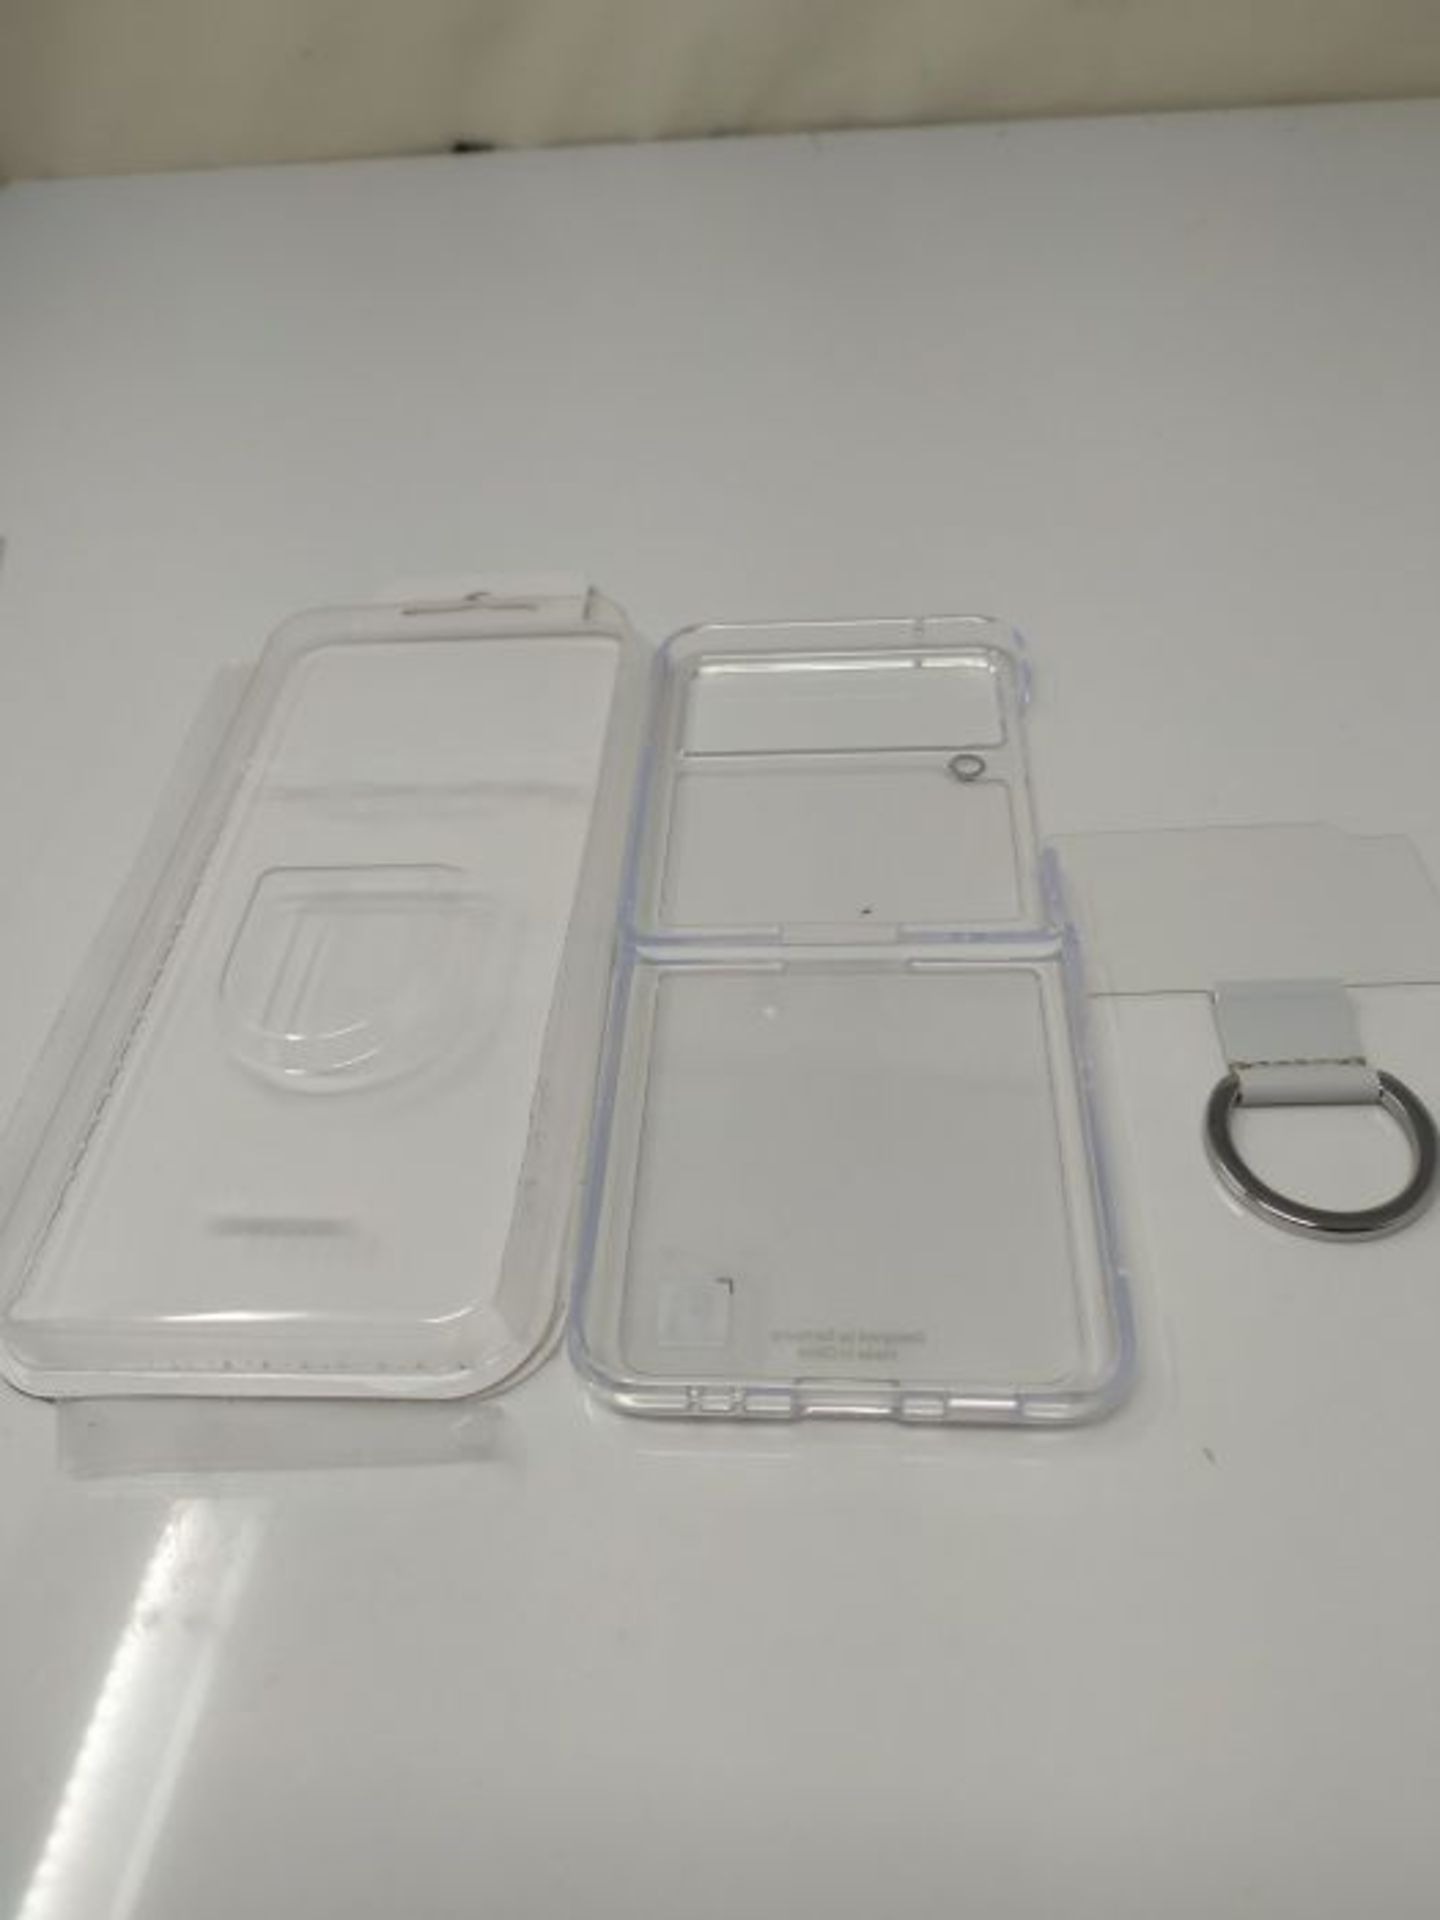 Samsung Galaxy Z Flip3 Clear Cover with Ring - Official Samsung Case - Transparent - Image 2 of 2